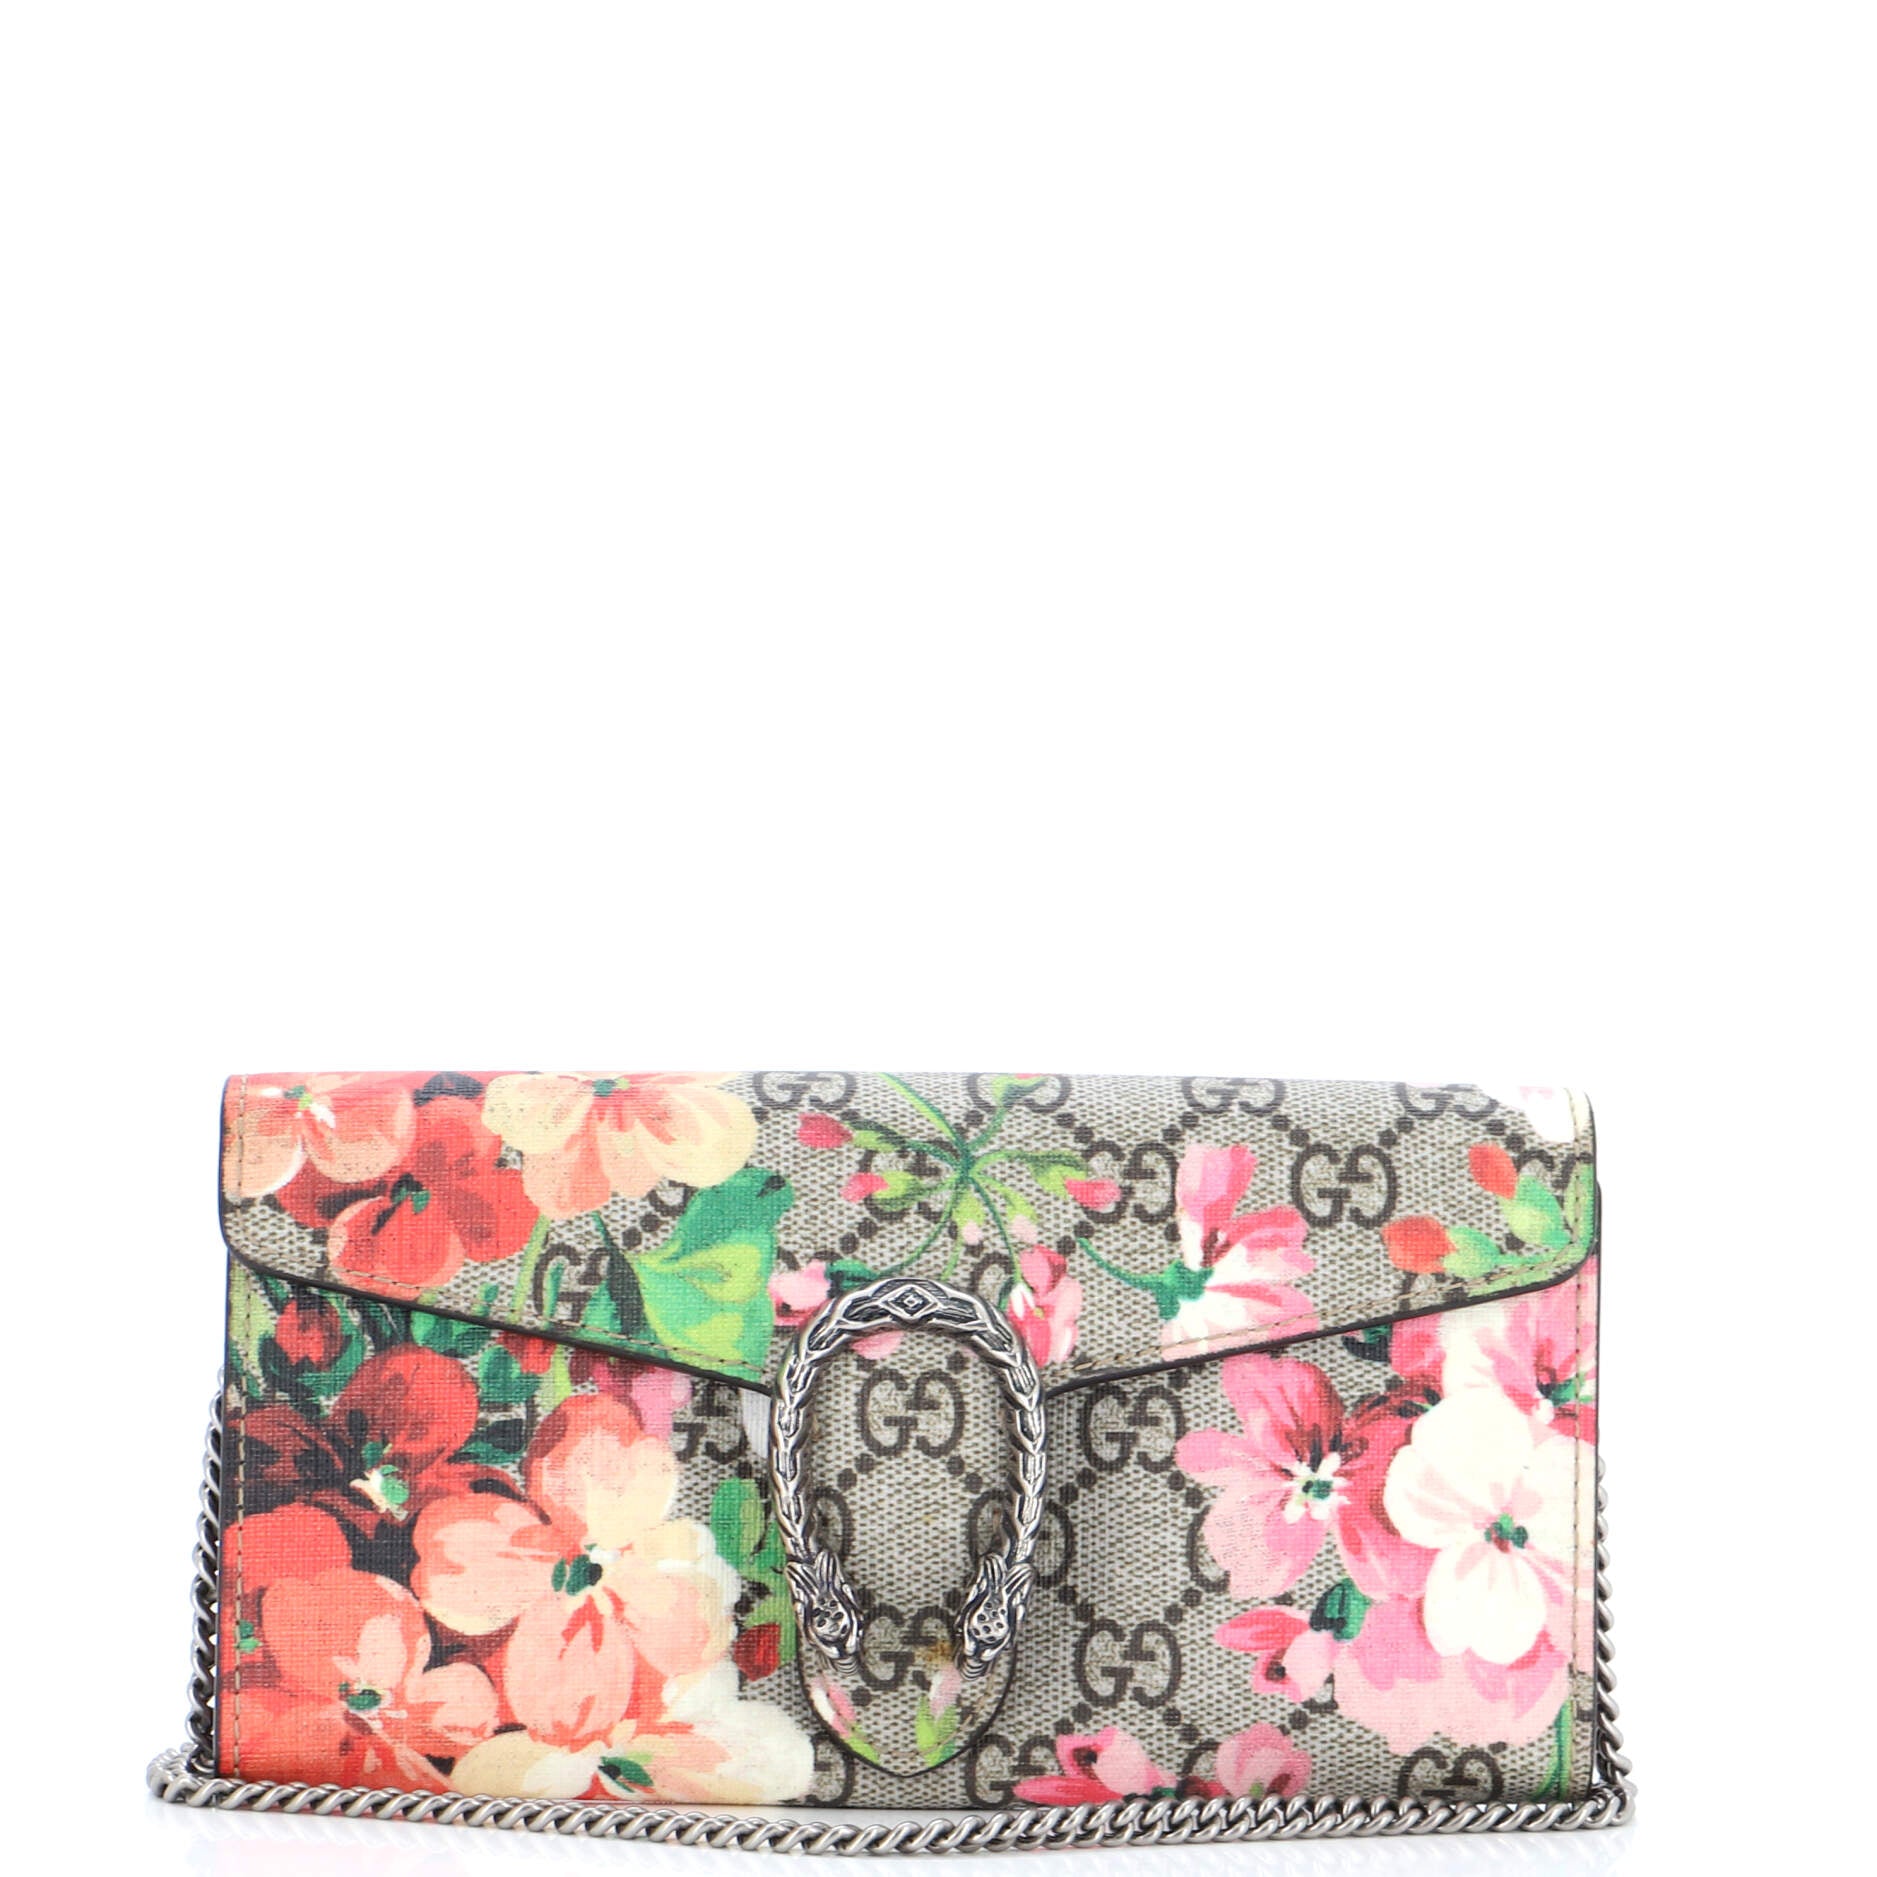 Dionysus Chain Wallet Blooms Print GG Coated Canvas Long